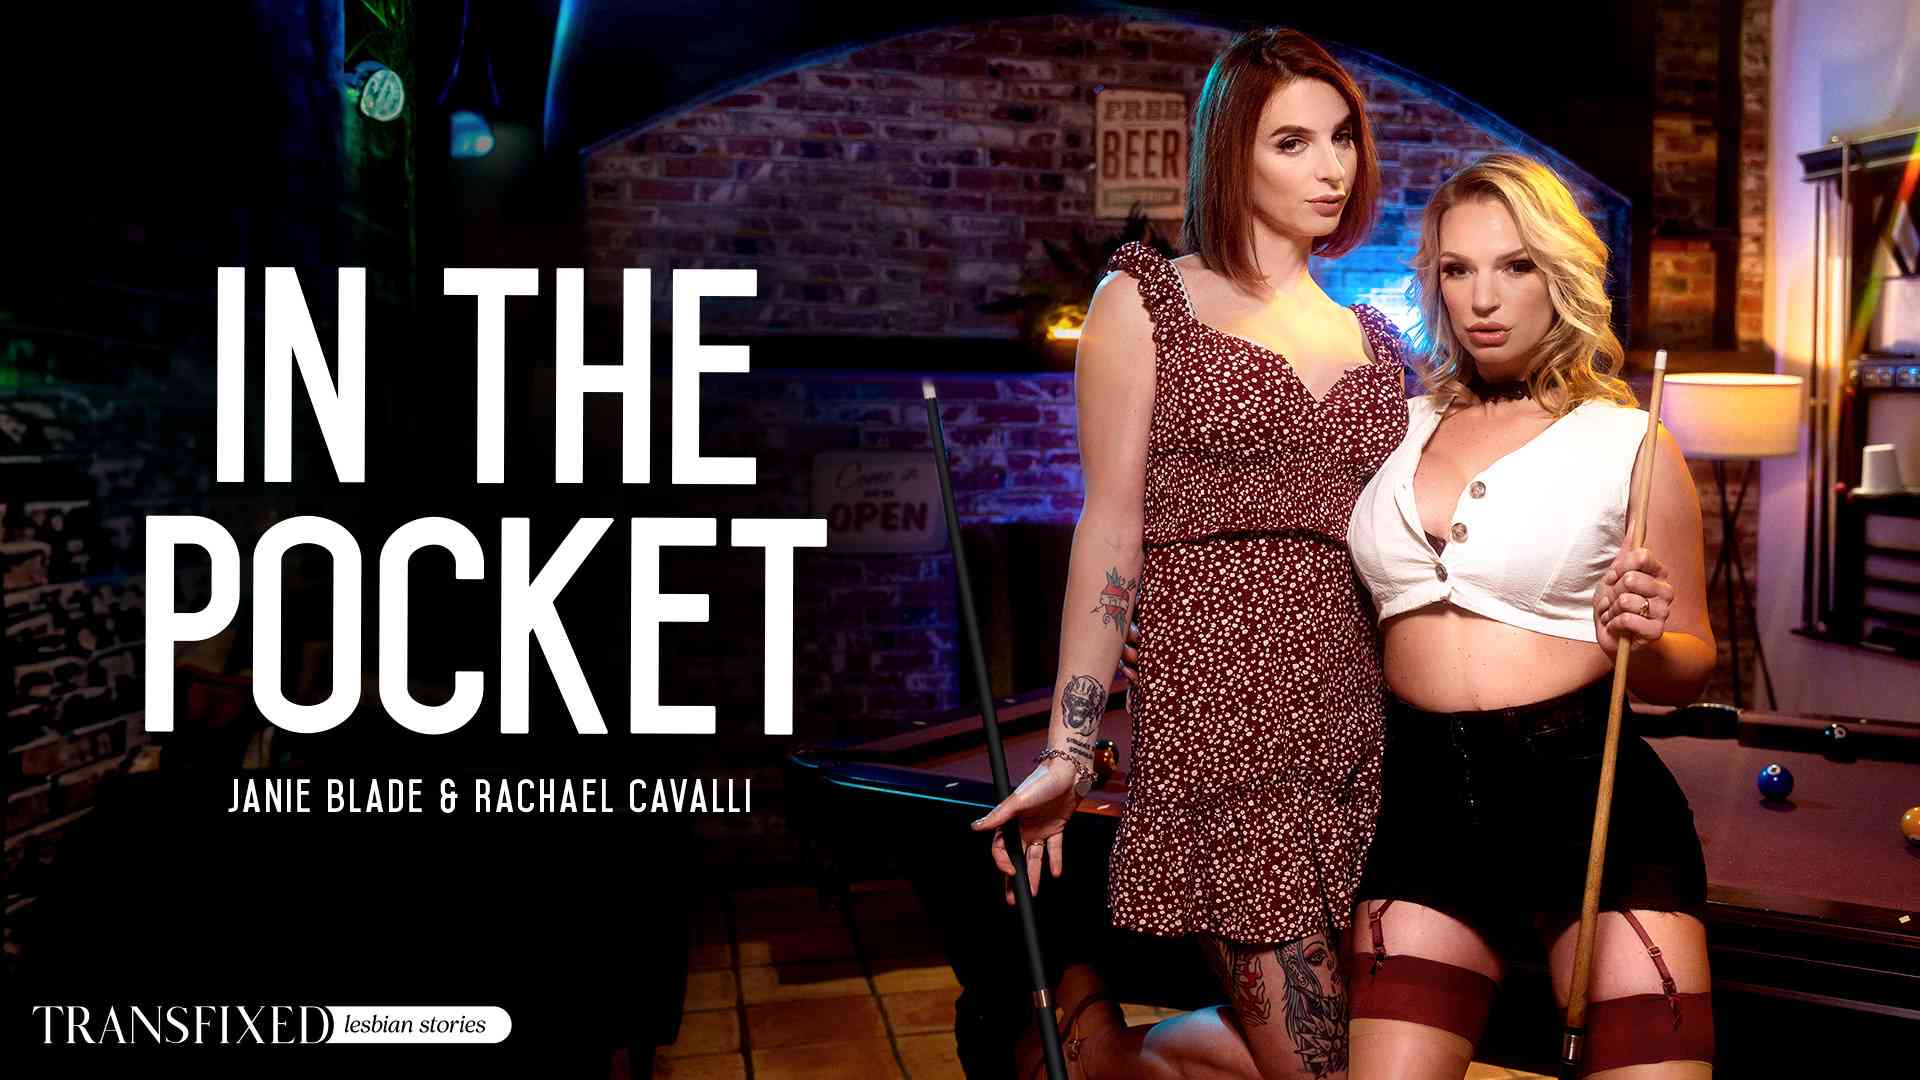 Transfixed &#8211; Rachael Cavalli And Janie Blade &#8211; In The Pocket